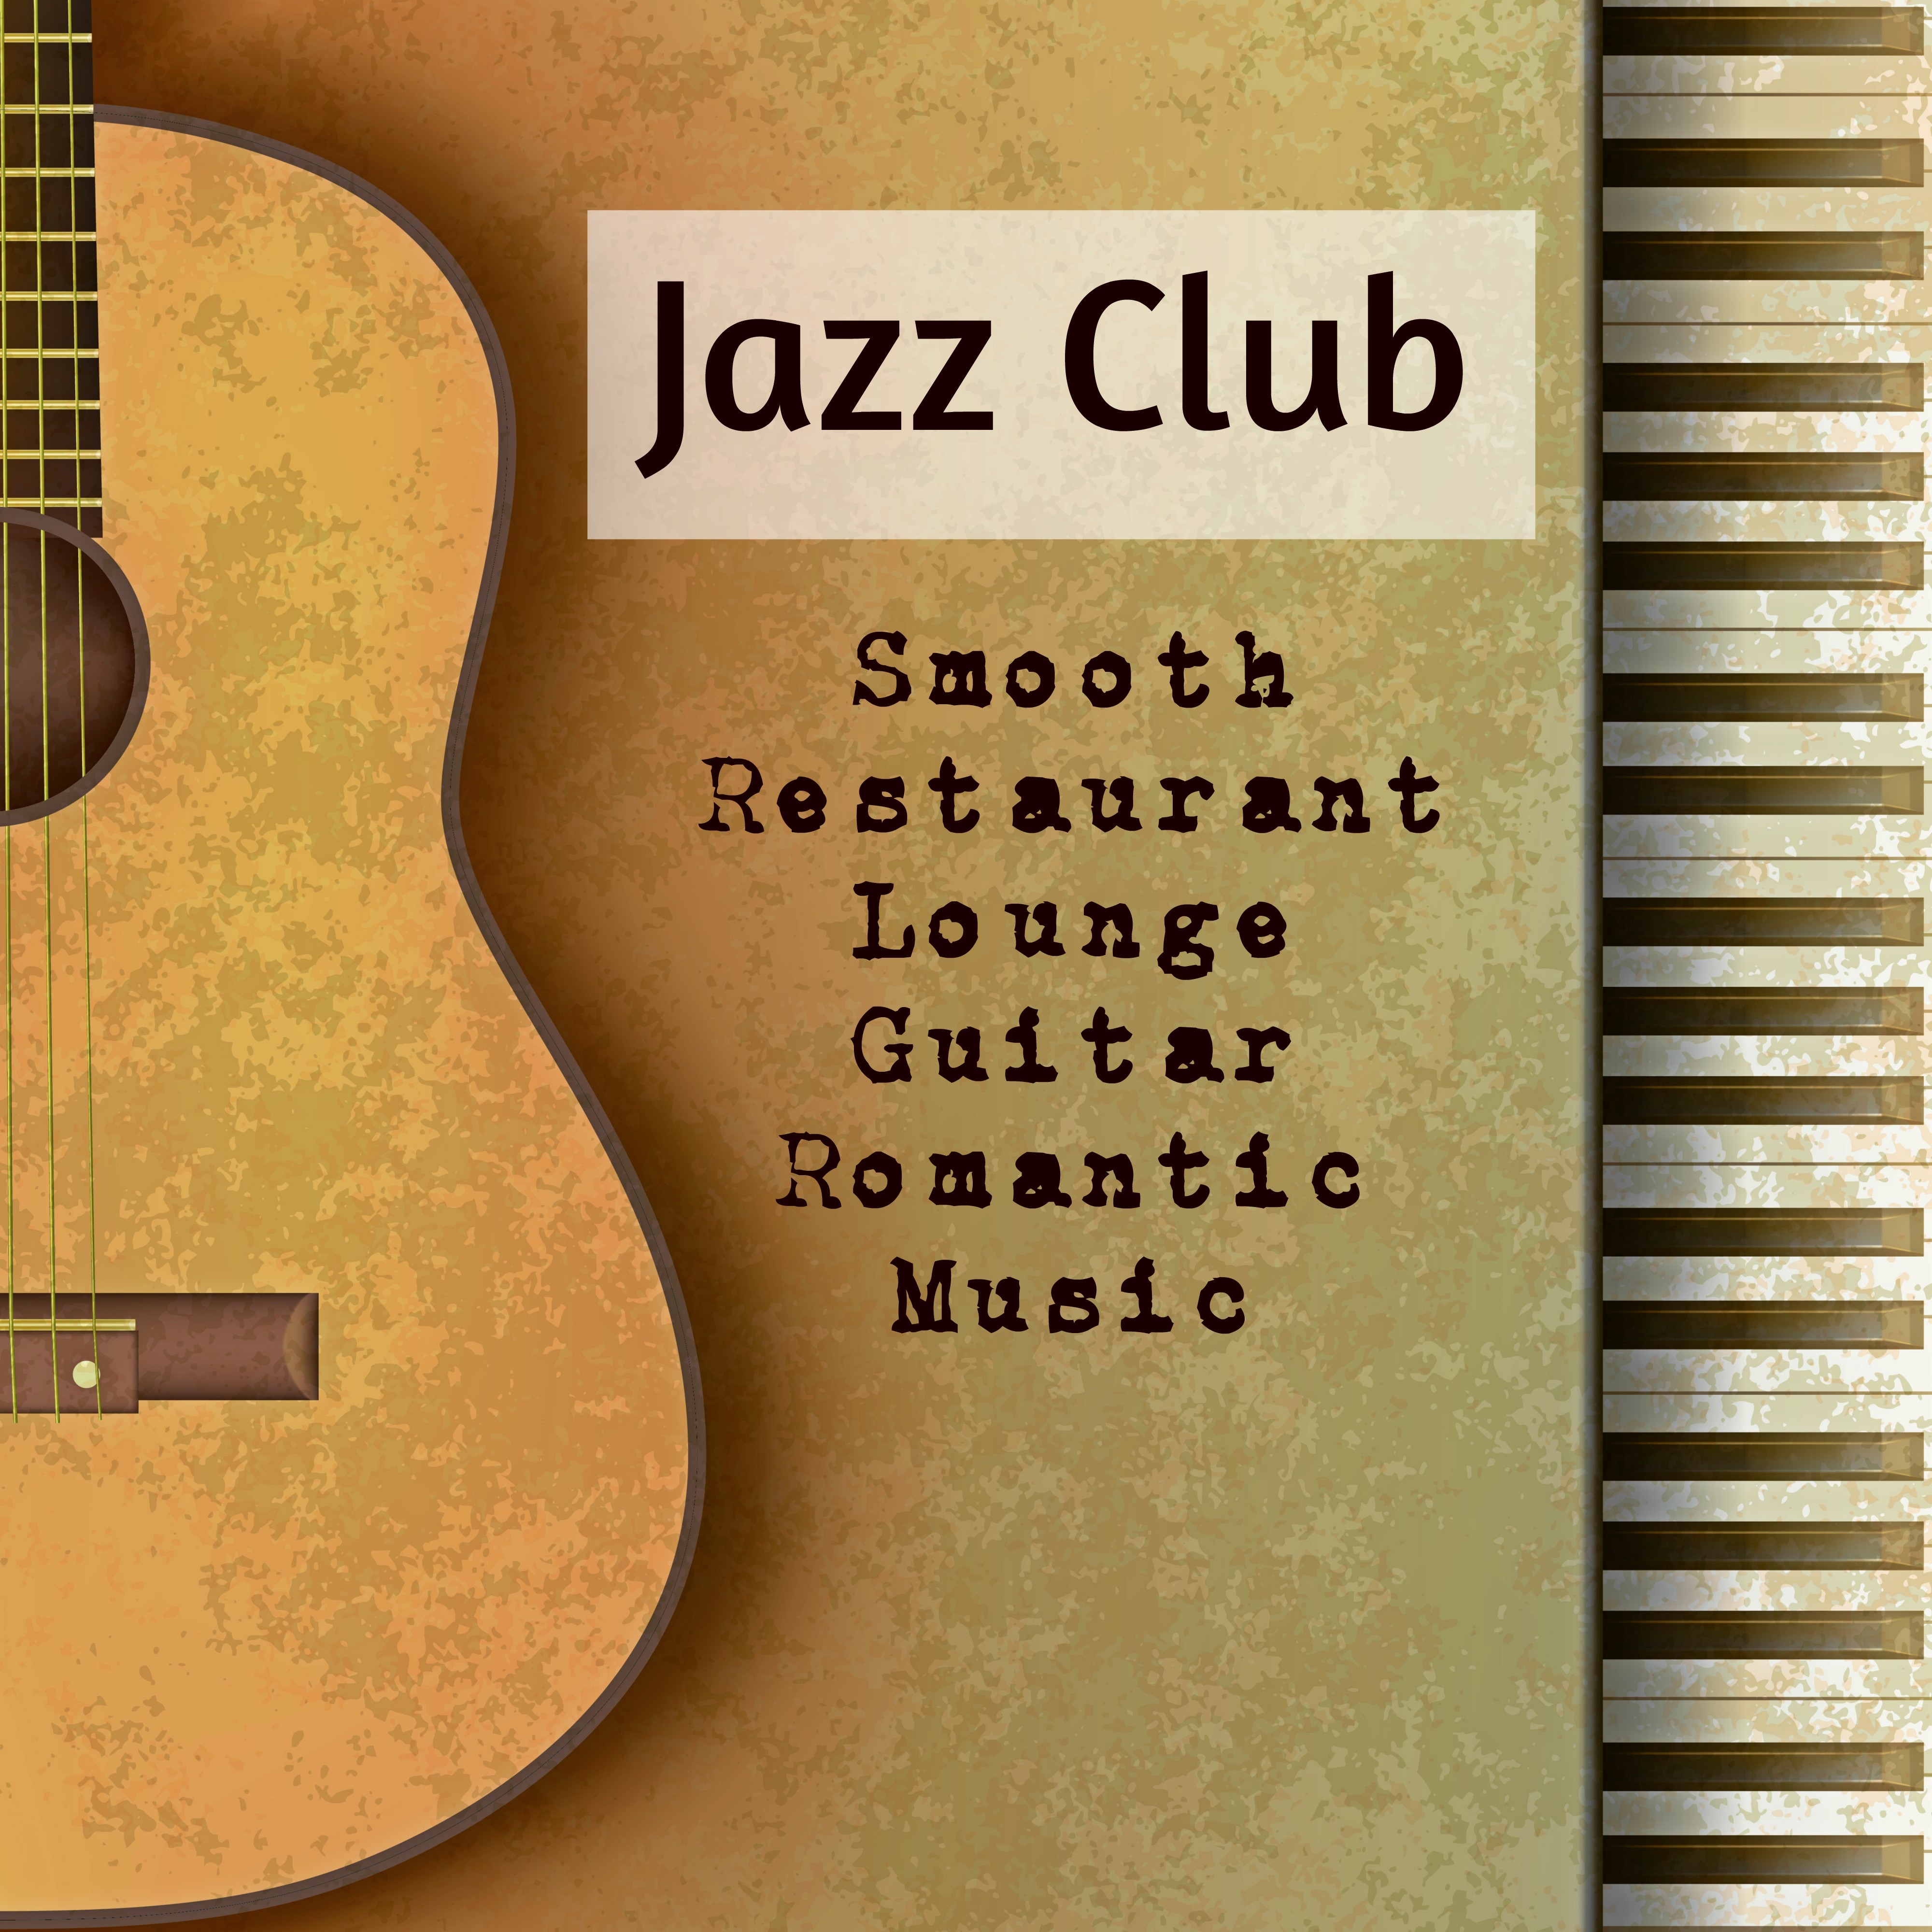 Jazz Club - Smooth Restaurant Lounge Guitar Romantic Music for Deep Concentration Health and Wellbeing Seductive Moments